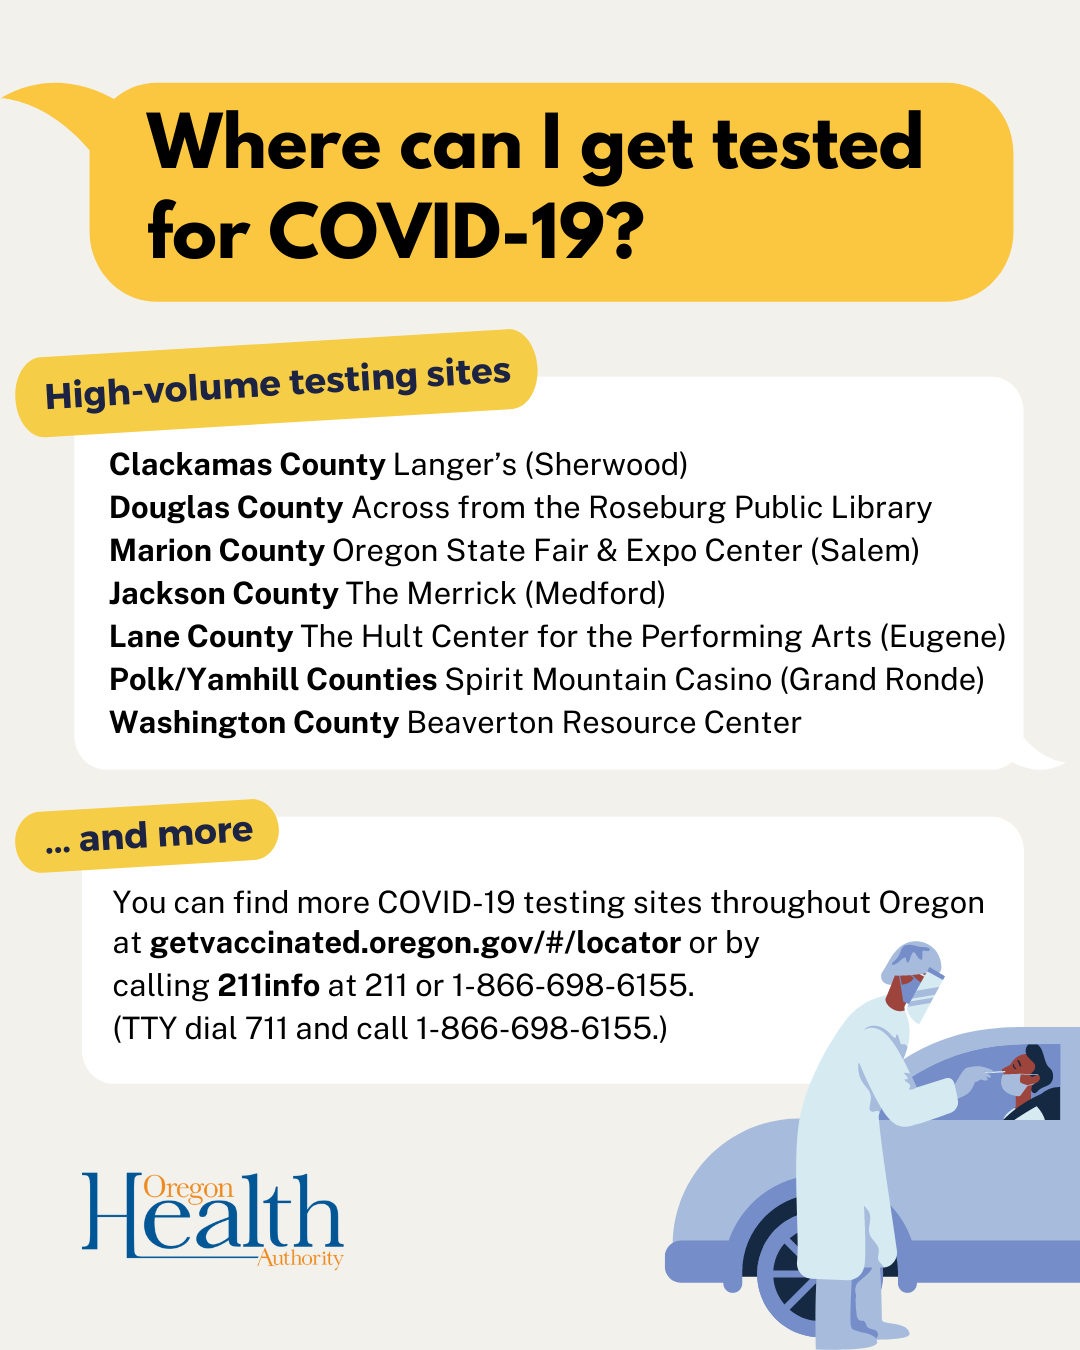 Infographic lists high-volume COVID-19 testing locations in Oregon. Click on the image to go to the story. 